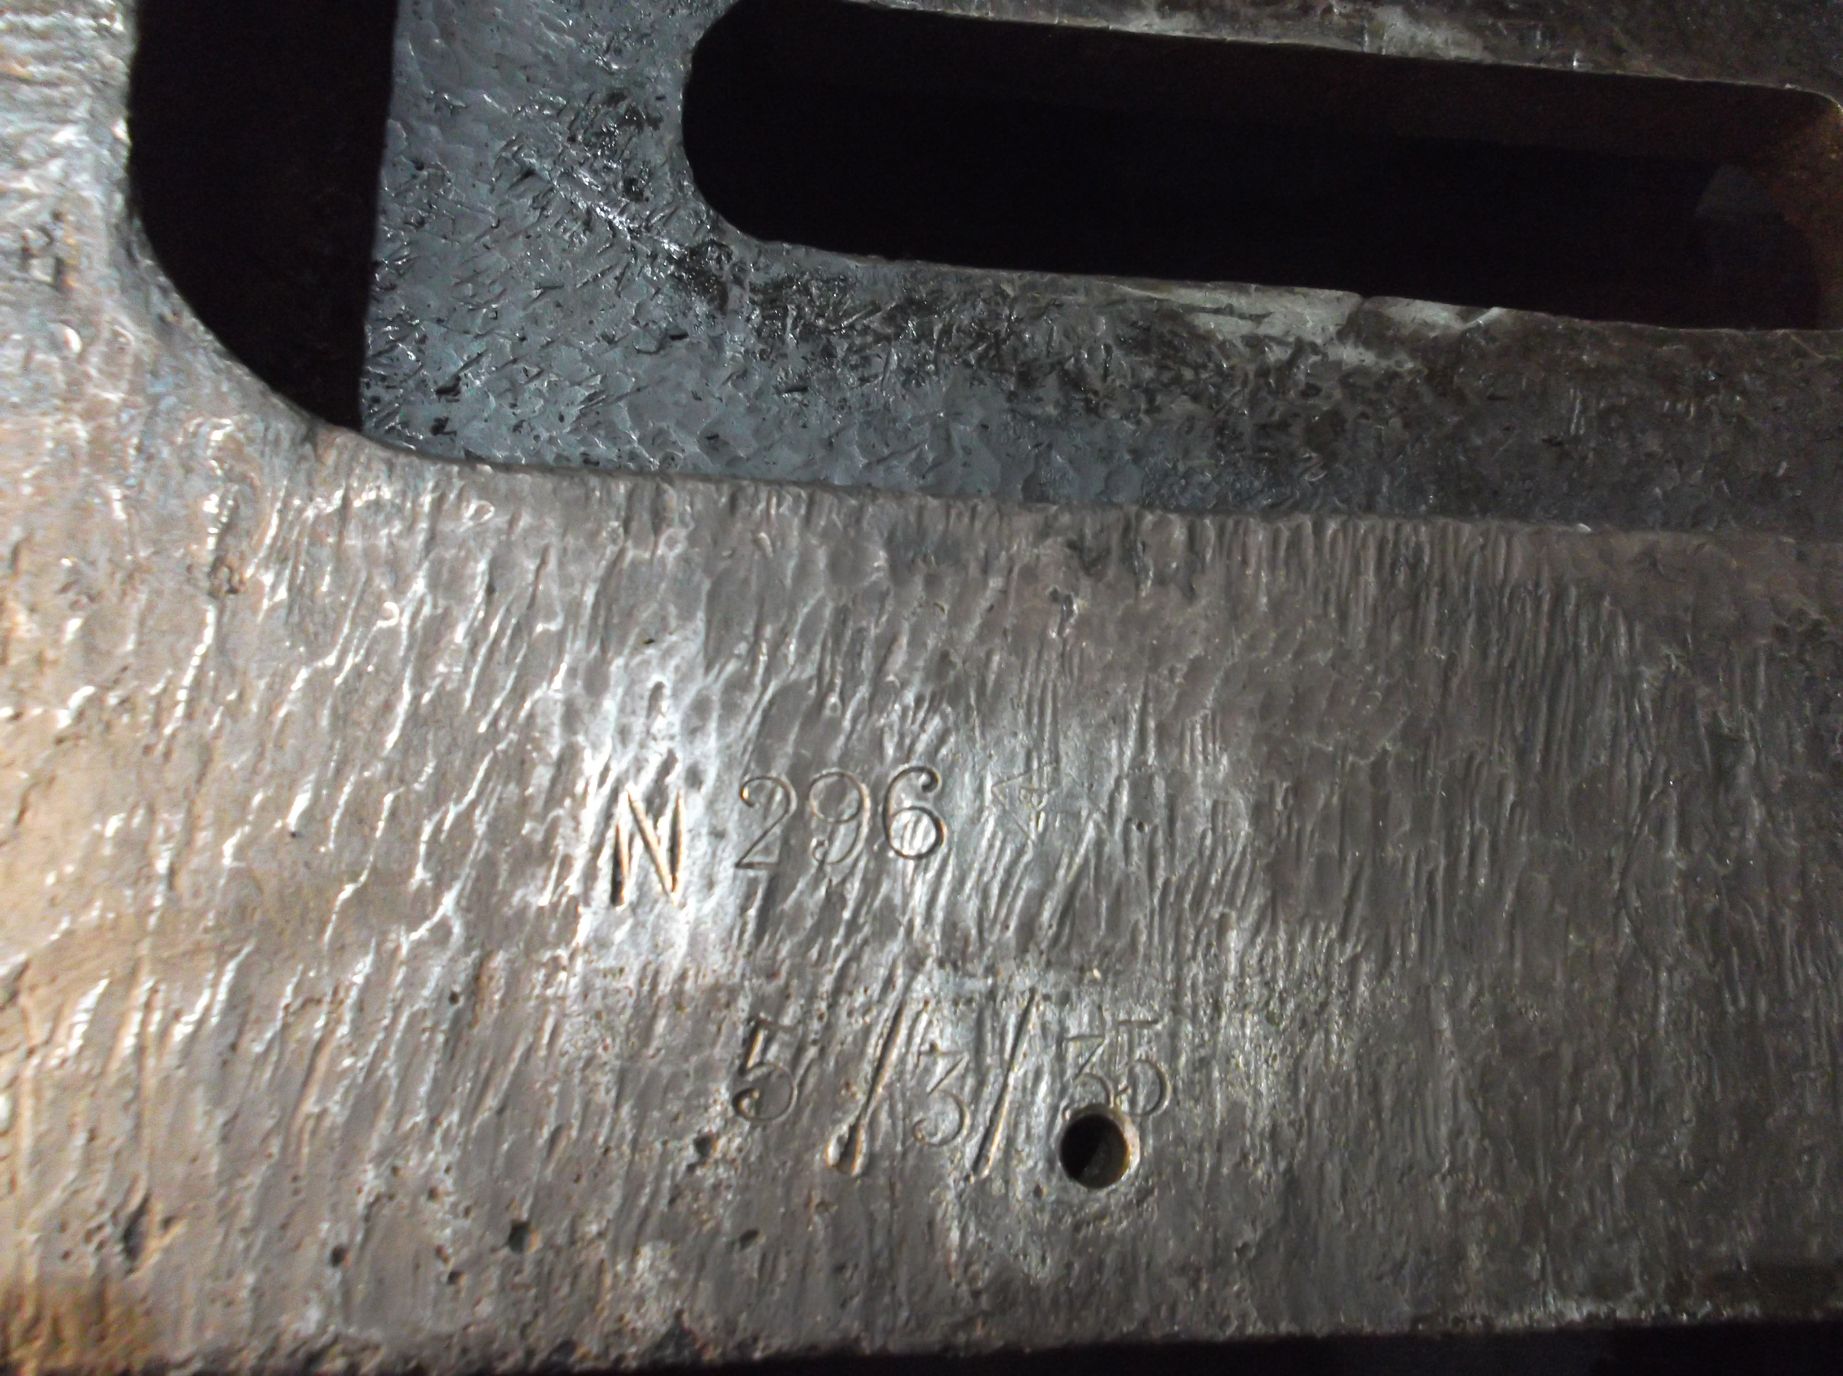 Marking on the underside of the bogie centre casting. Perhaps a date with the drawing/part number above. To the right of the drawing number is a diamond stamp with 'NE' inside, similar to the diamond 'LNER' stamps found on the right hand frame plates.